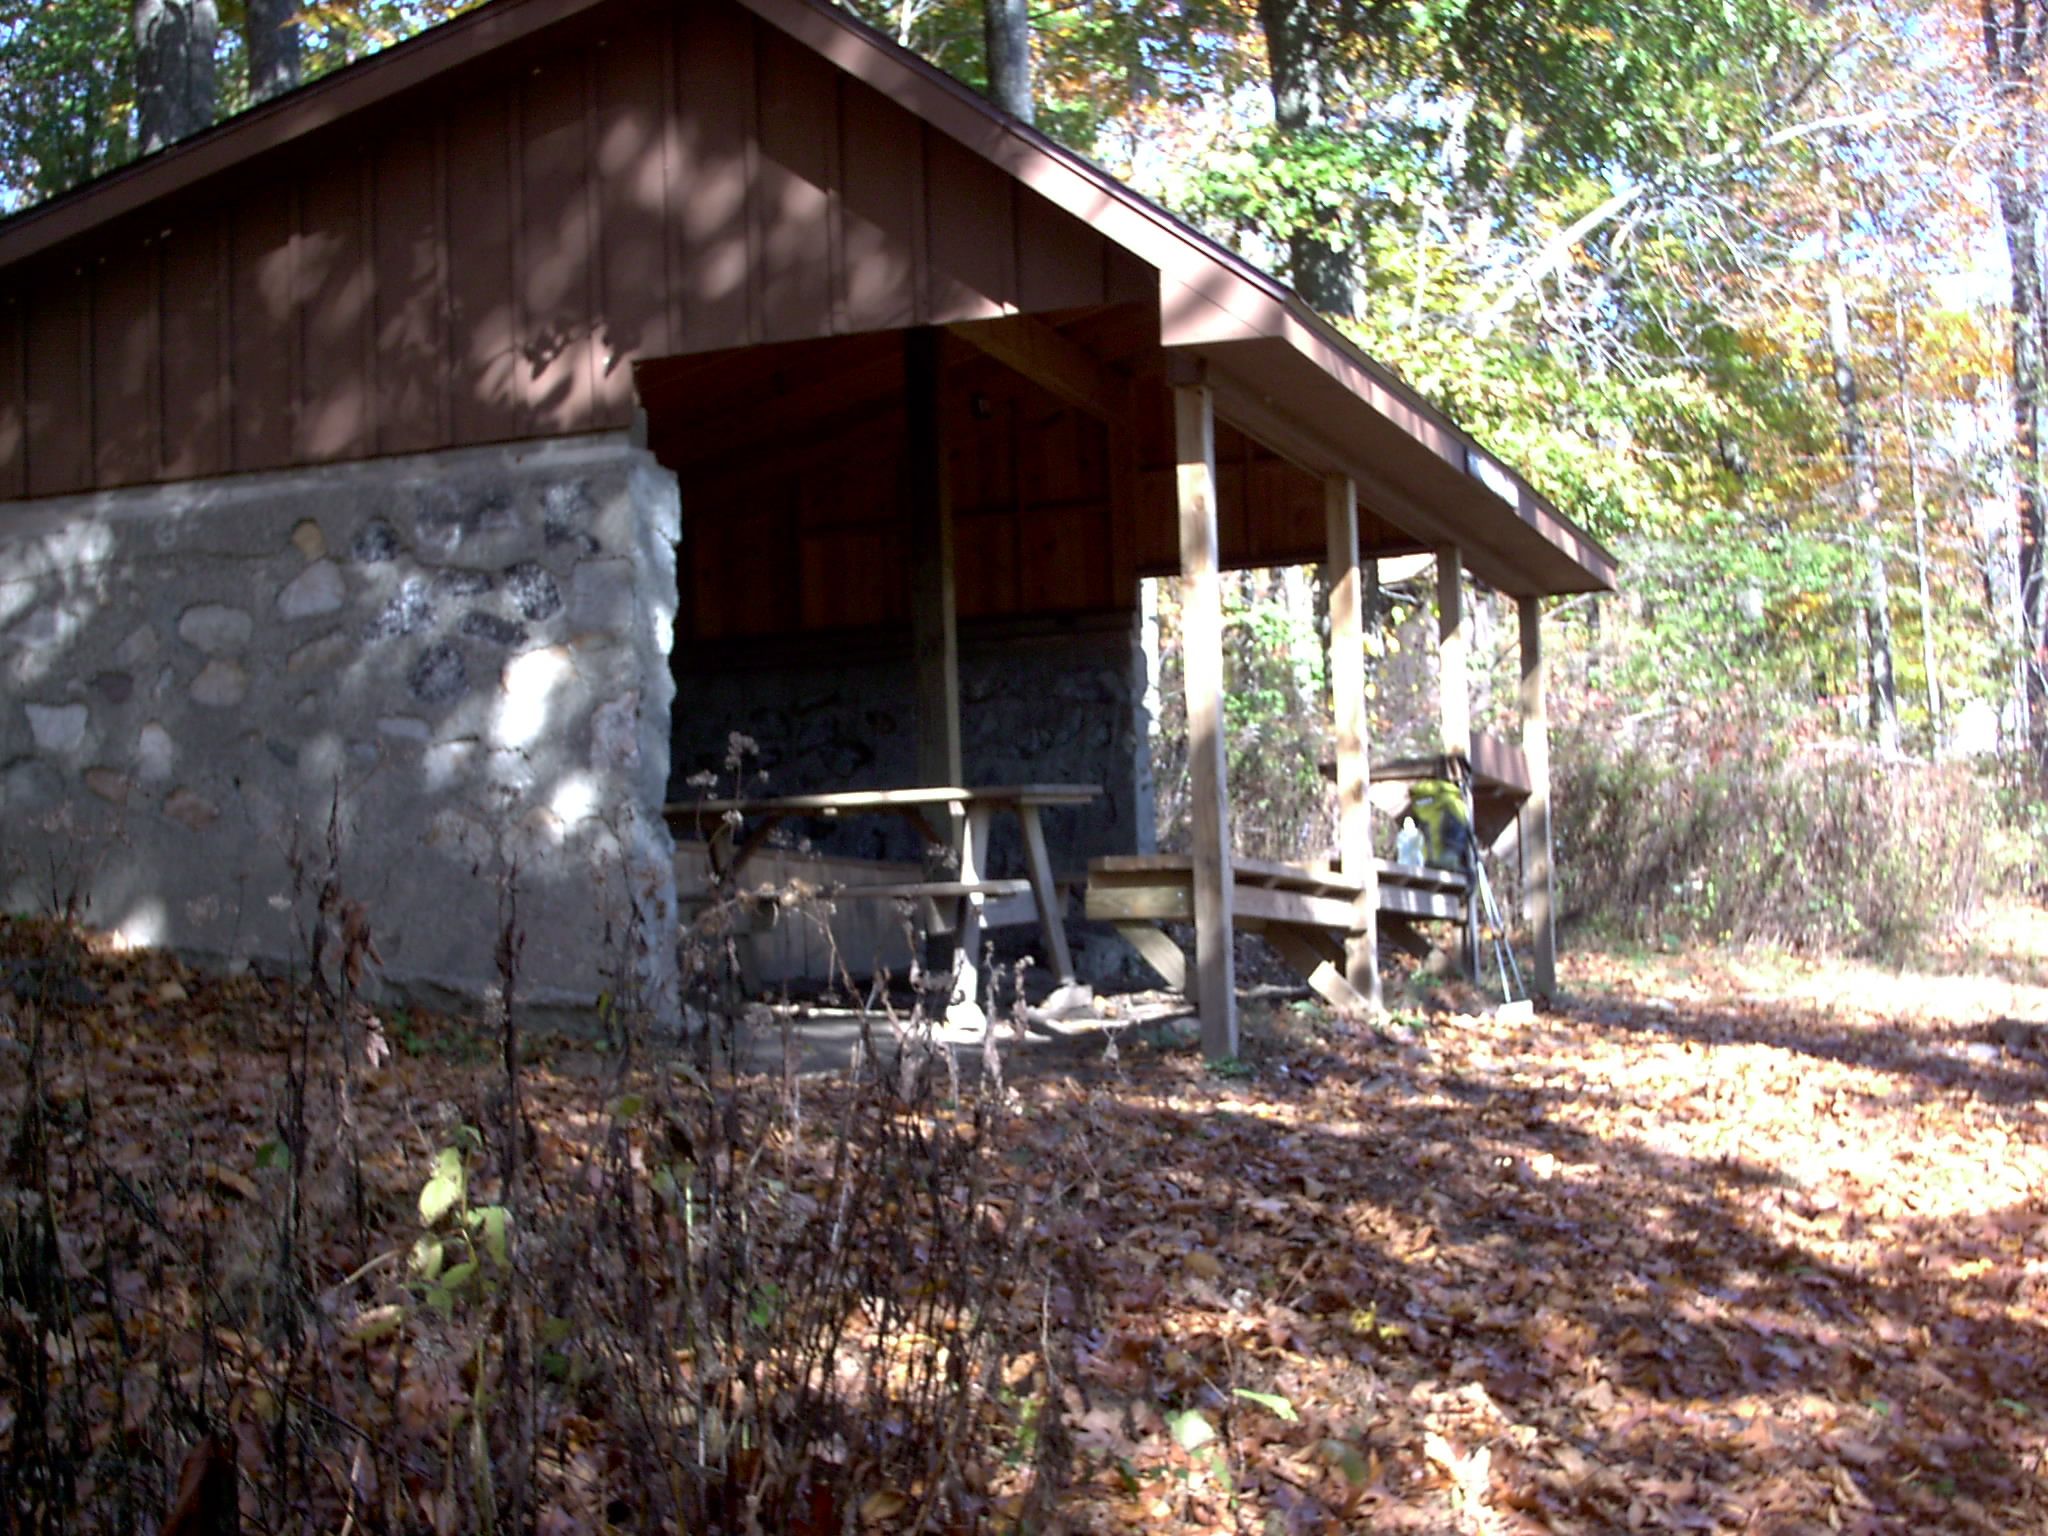 mm 6.5 - Kirkridge shelter from the northern blue-blaze trail. You can just see the composting privy beyond it in the woods.  Courtesy stewartriley@earthlink.net